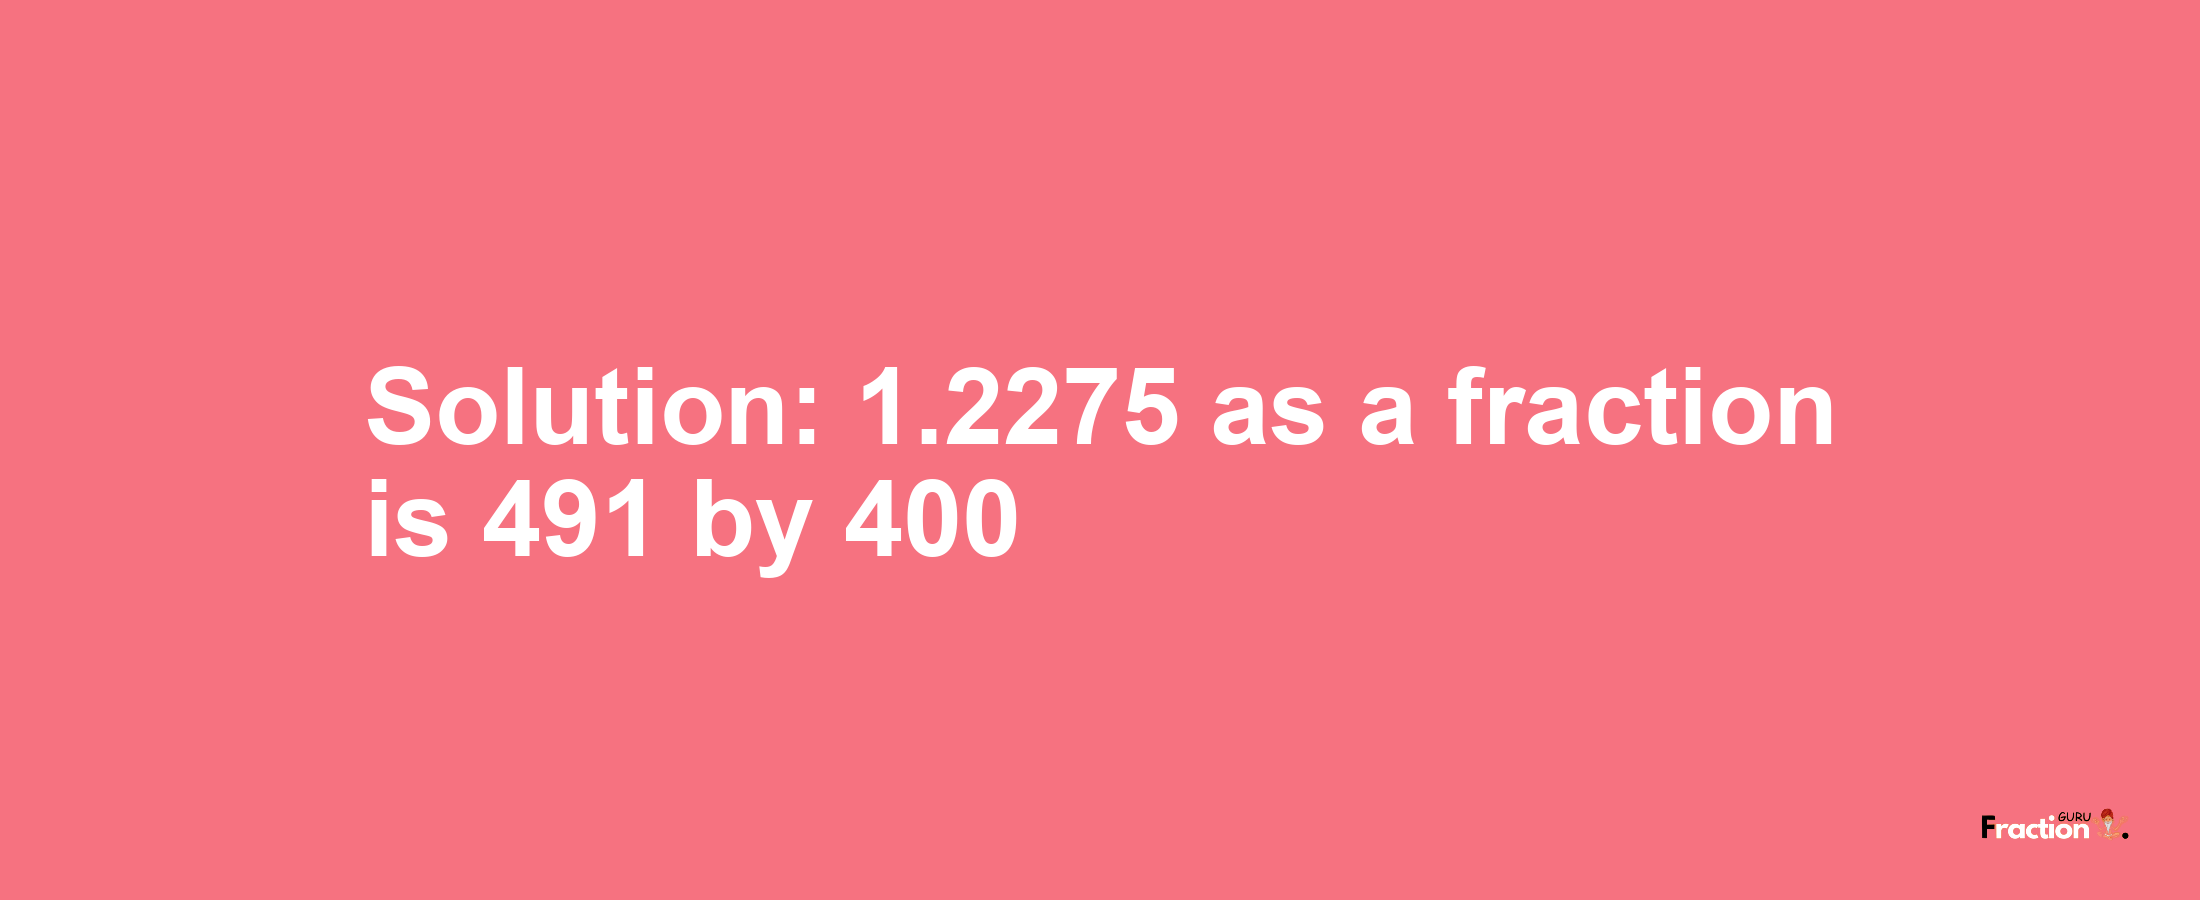 Solution:1.2275 as a fraction is 491/400